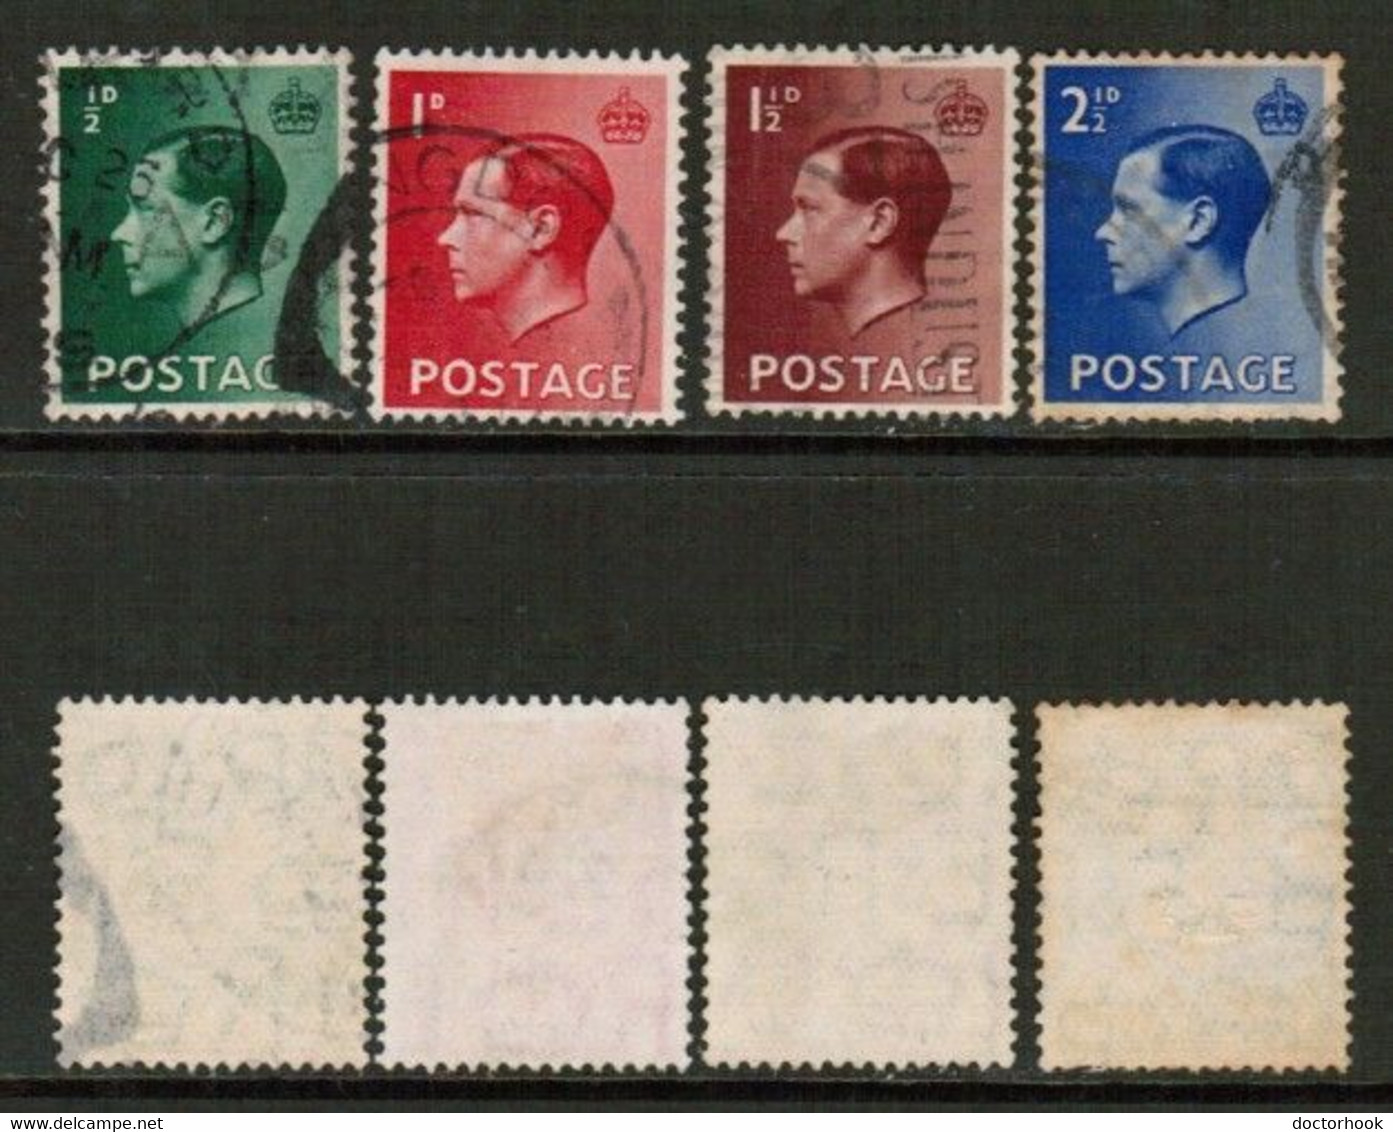 GREAT BRITAIN   Scott # 230-3 USED (CONDITION AS PER SCAN) (Stamp Scan # 832-8) - Usati